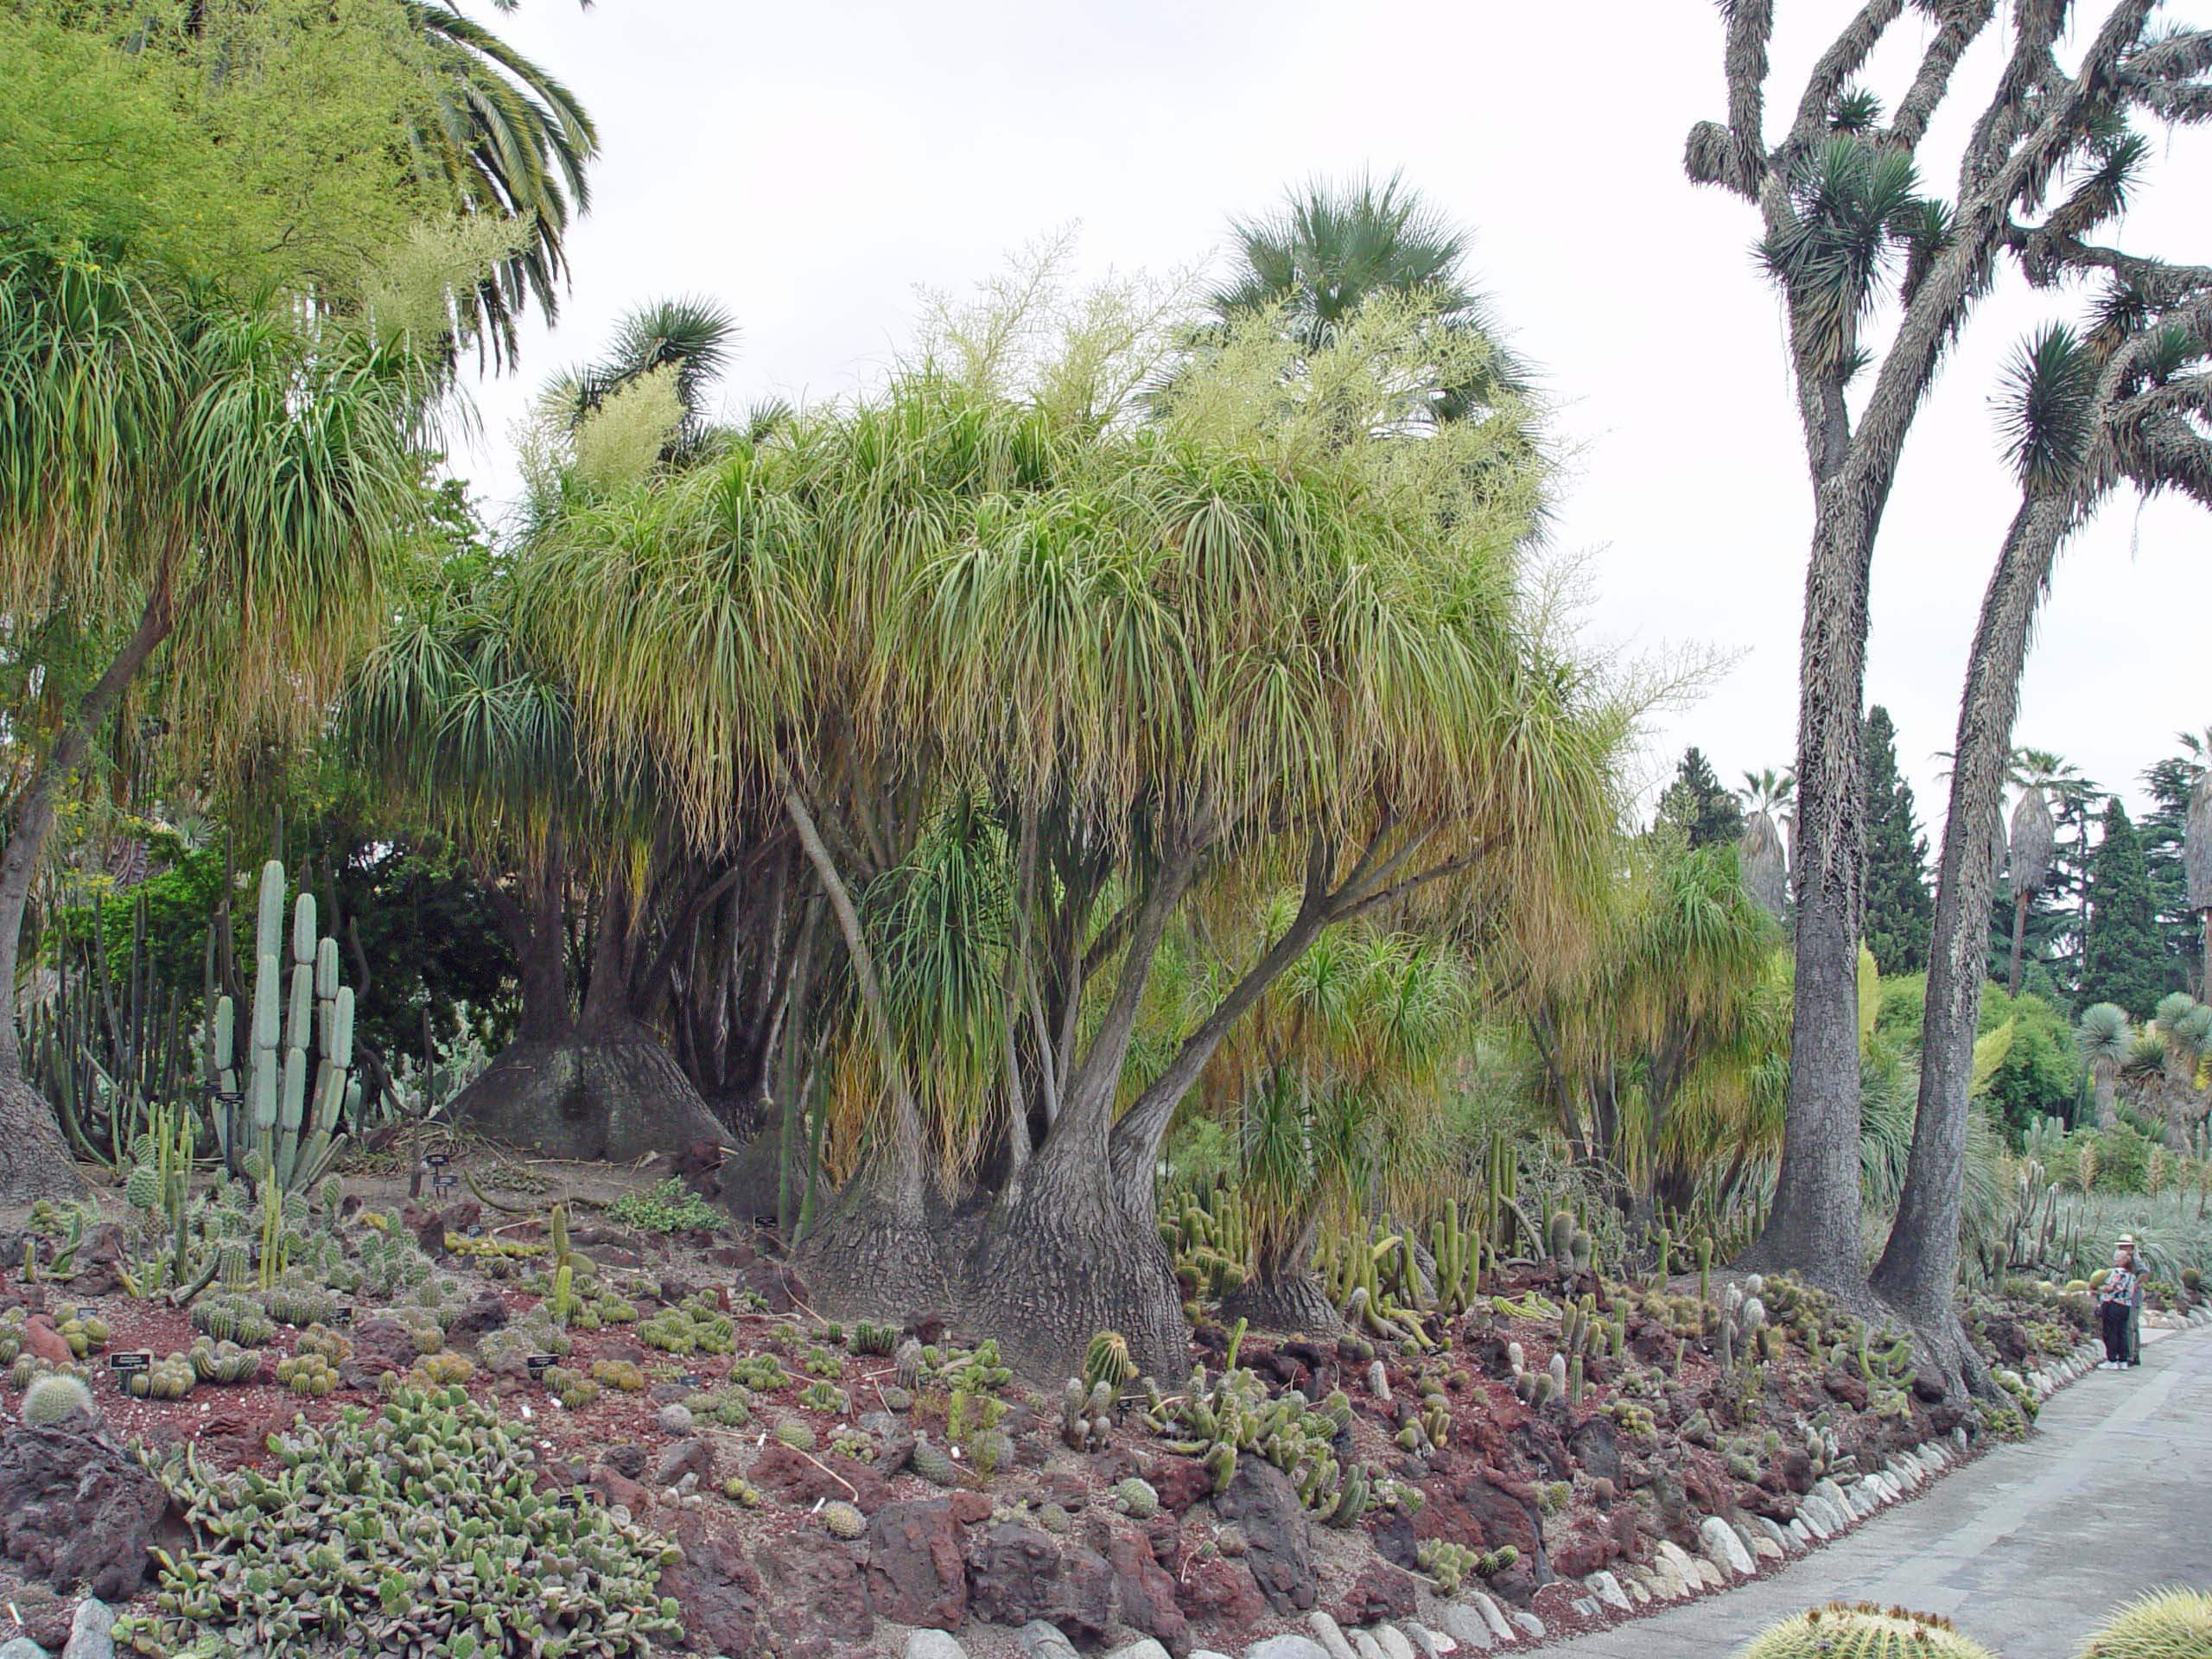 This south-facing slope uses red lava rocks to create the structure for a cacti collection at the Huntington Botanical Garden in Pasadena, CA.